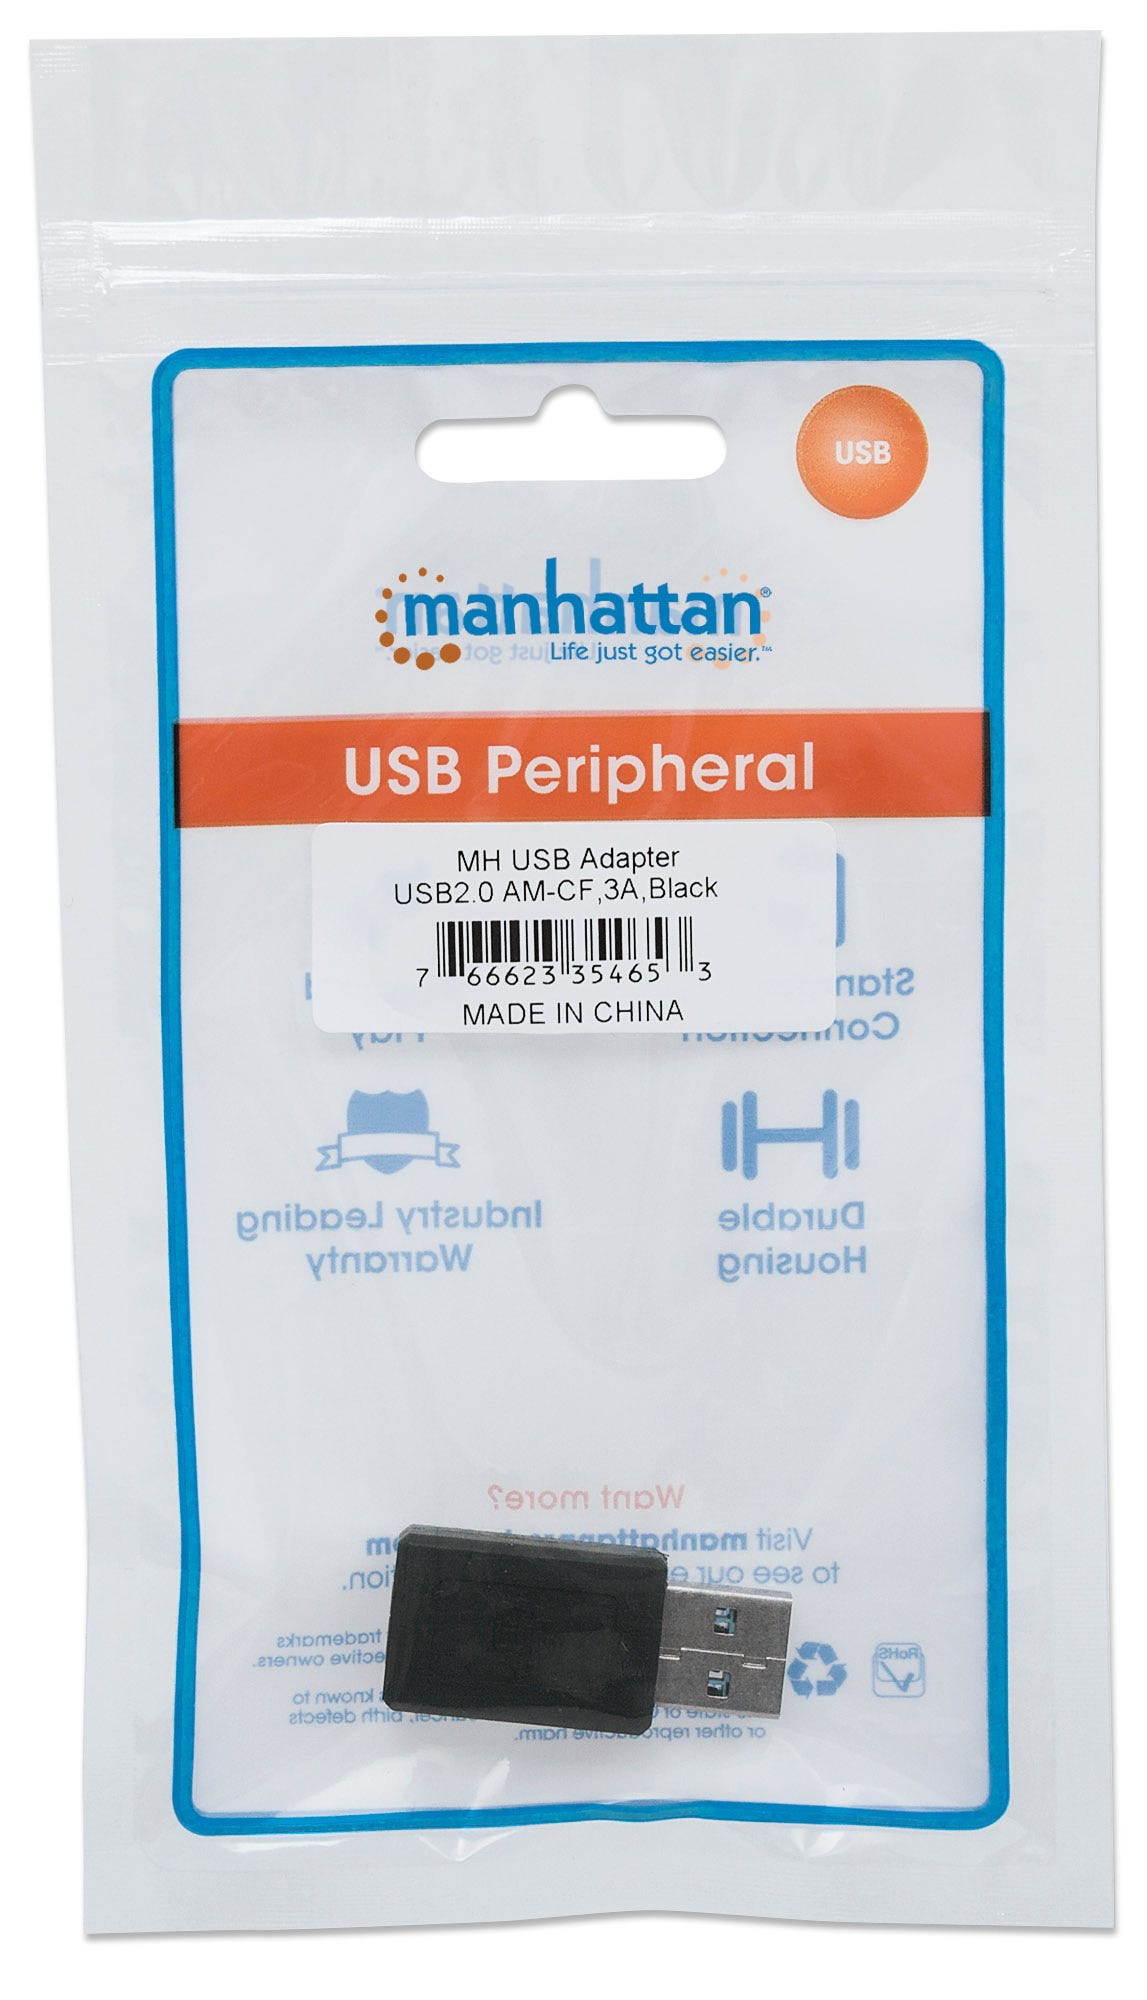 Manhattan USB-C to USB-A Adapter, Female to Male, 480 Mbps (USB 2.0), Black, Polybag